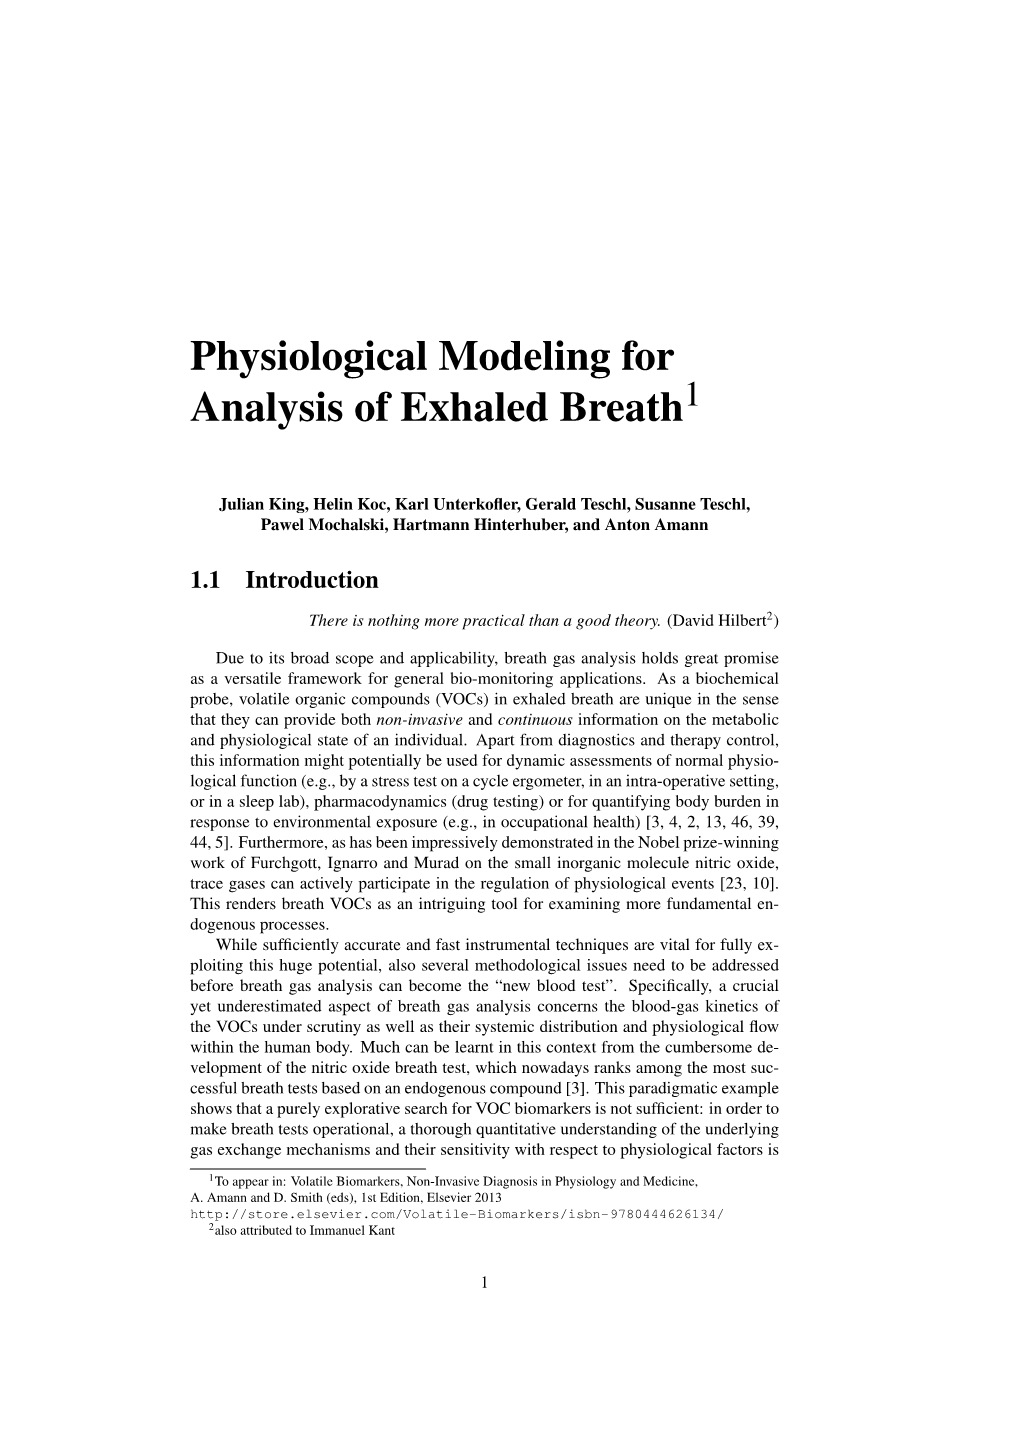 Physiological Modeling for Analysis of Exhaled Breath1